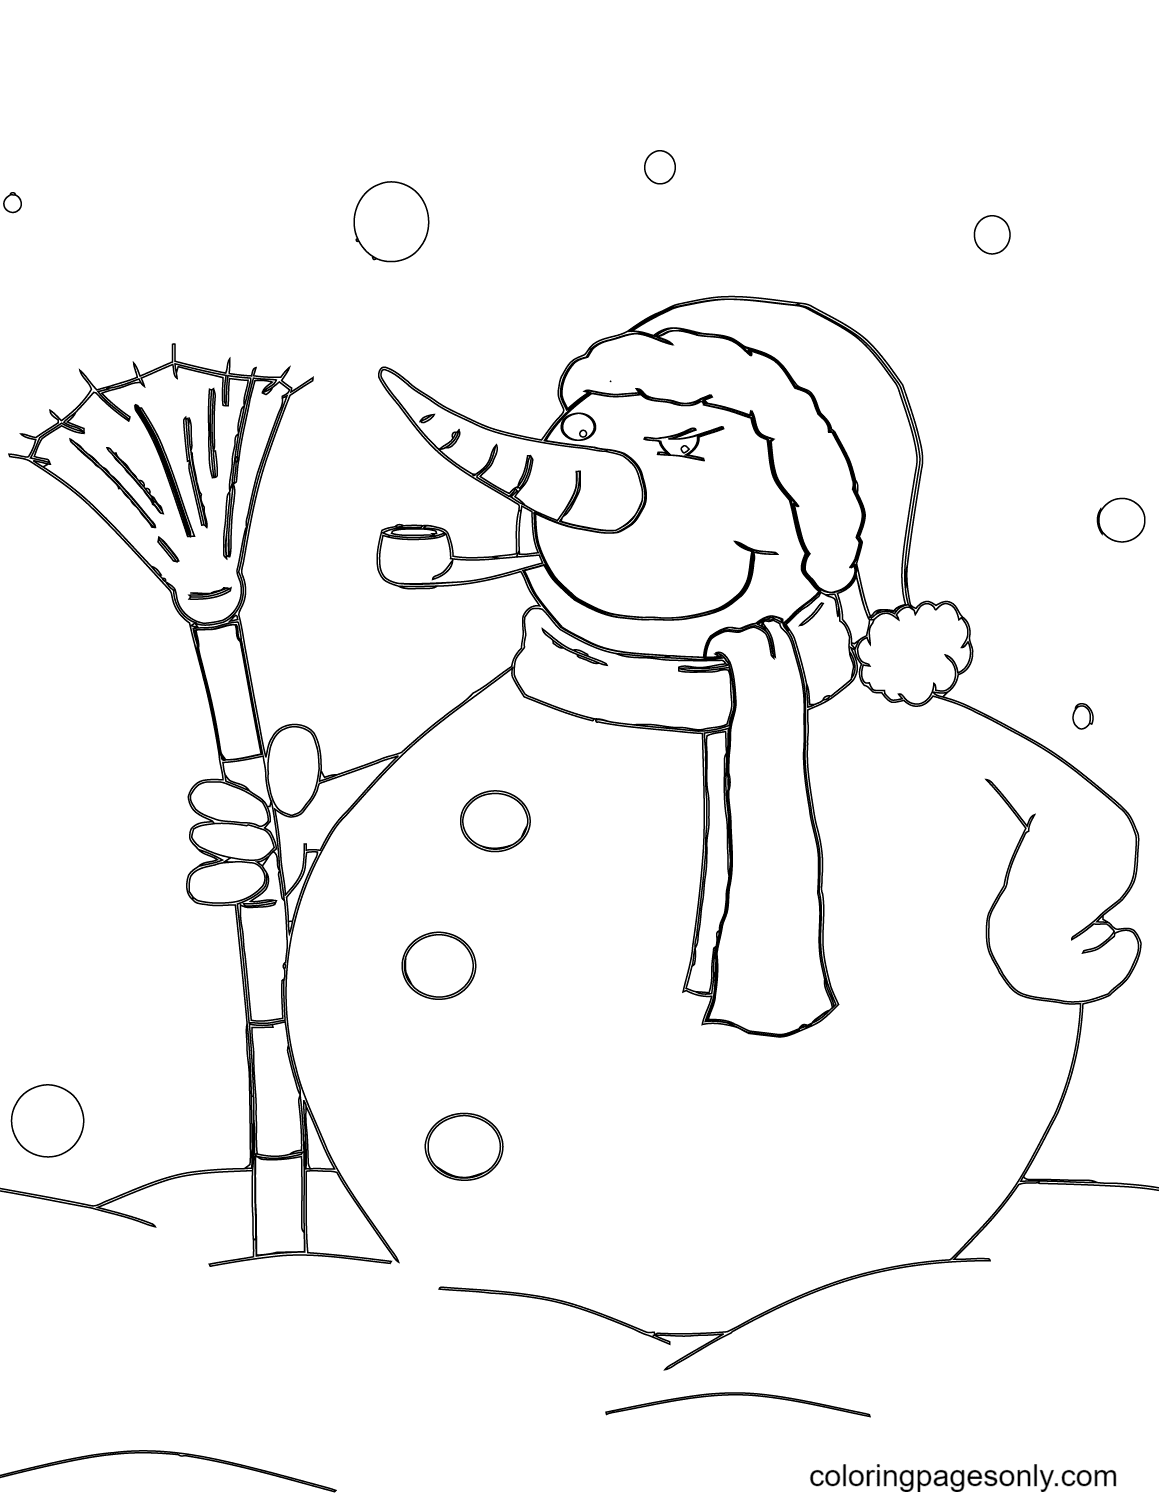 Snowman with Pipe and Broom Coloring Page